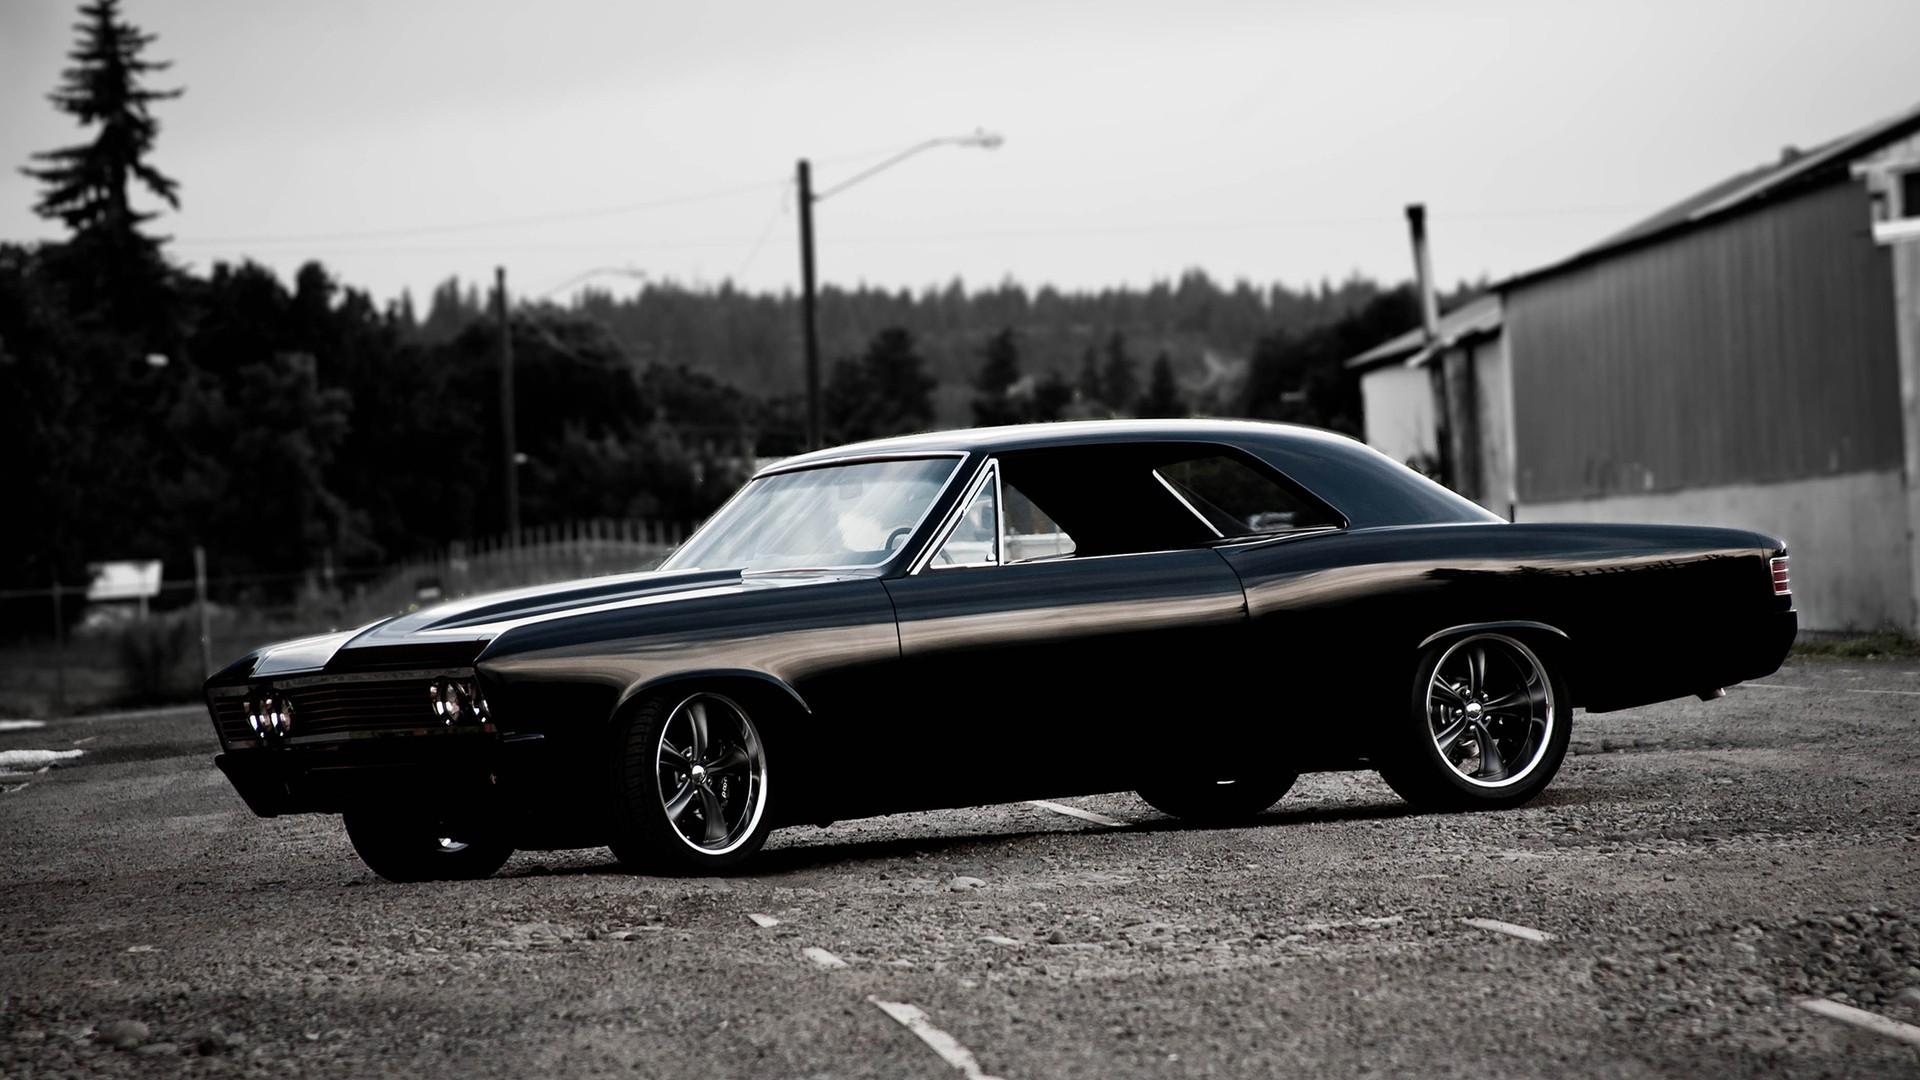 cars, muscle cars, roads, Chevrolet Chevelle SS, black cars, classic